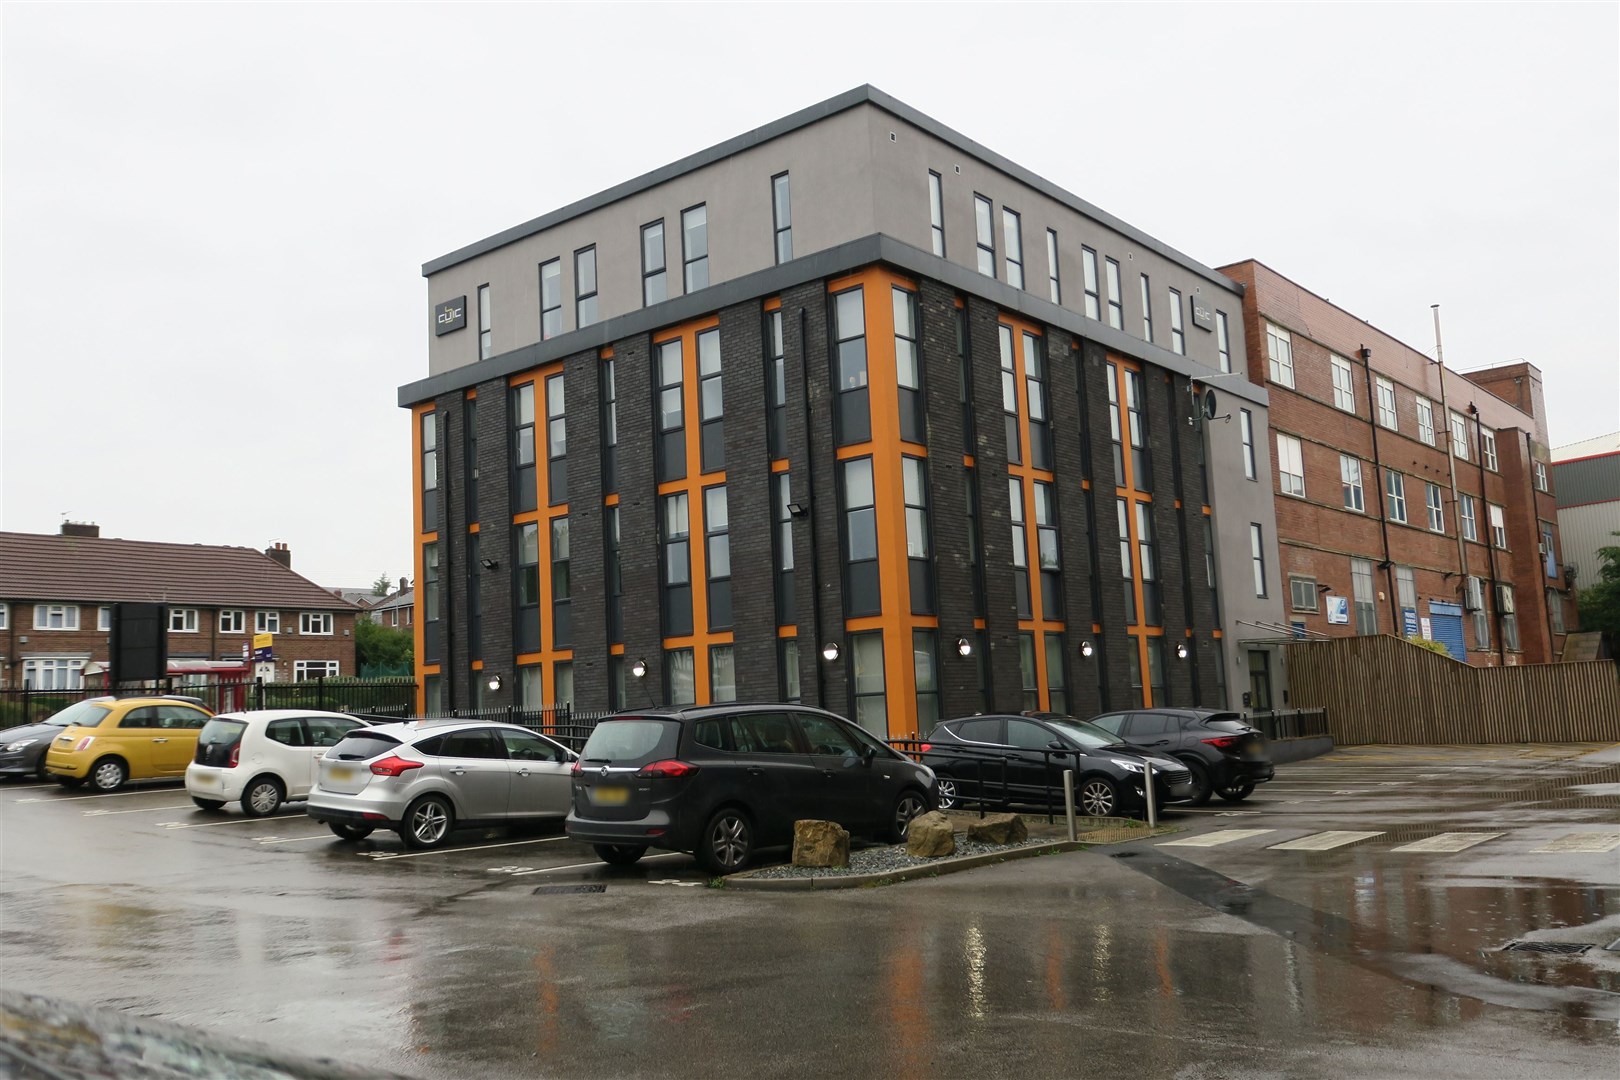 Cubic Apartments in Leeds, the location of one of the seized properties (NCA/PA)